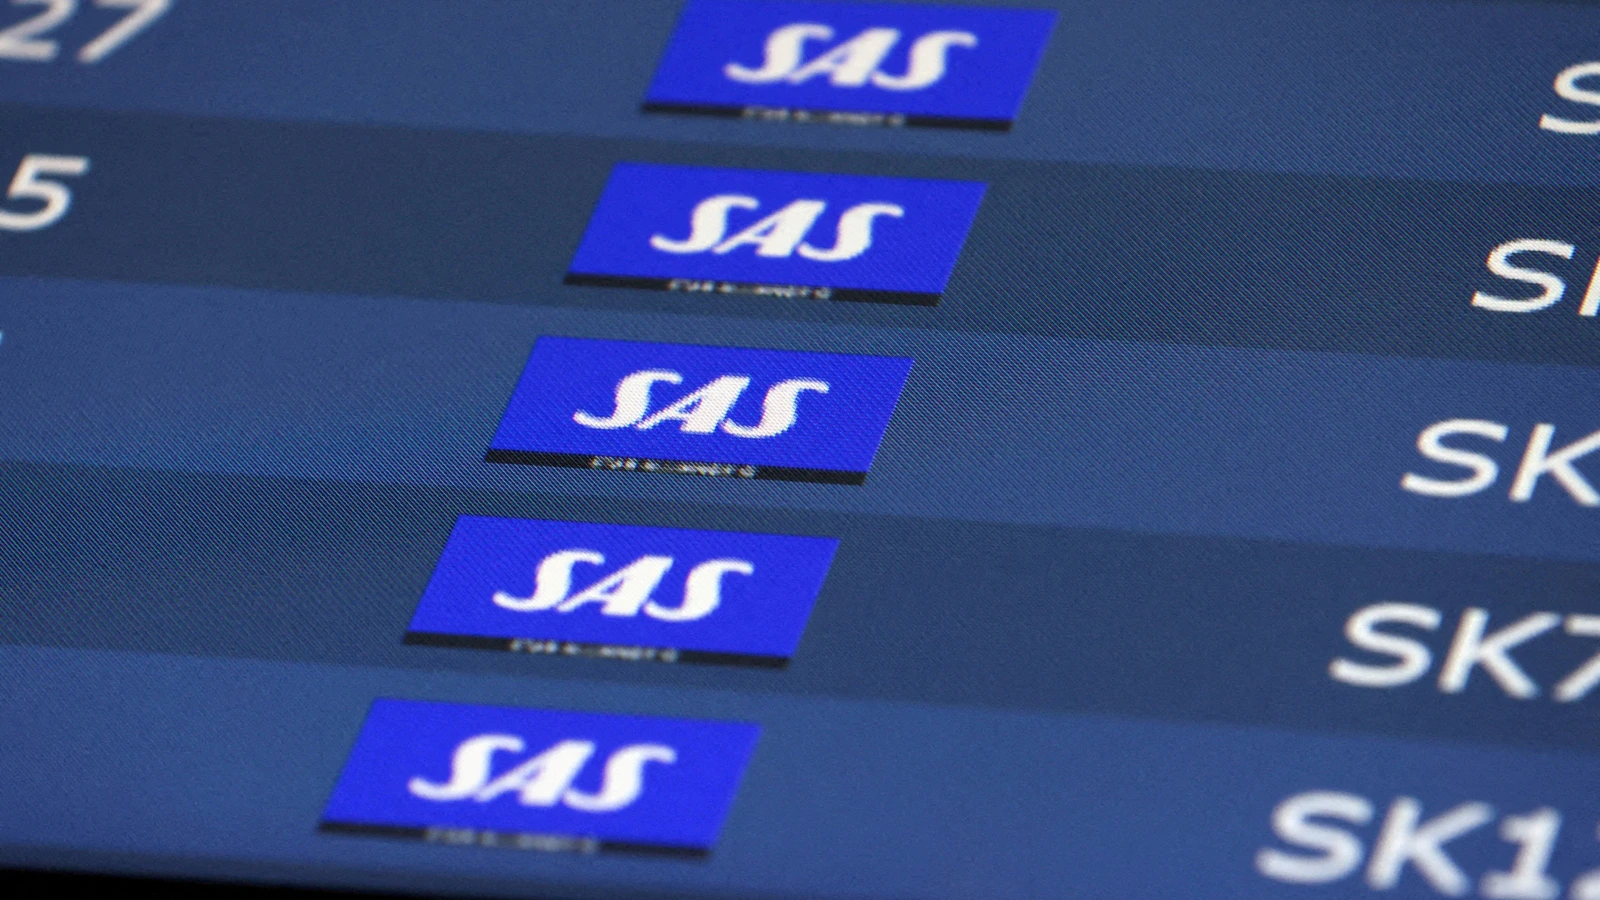 Scandinavian airline reaches deal over 15-day strike costing $12 million per day